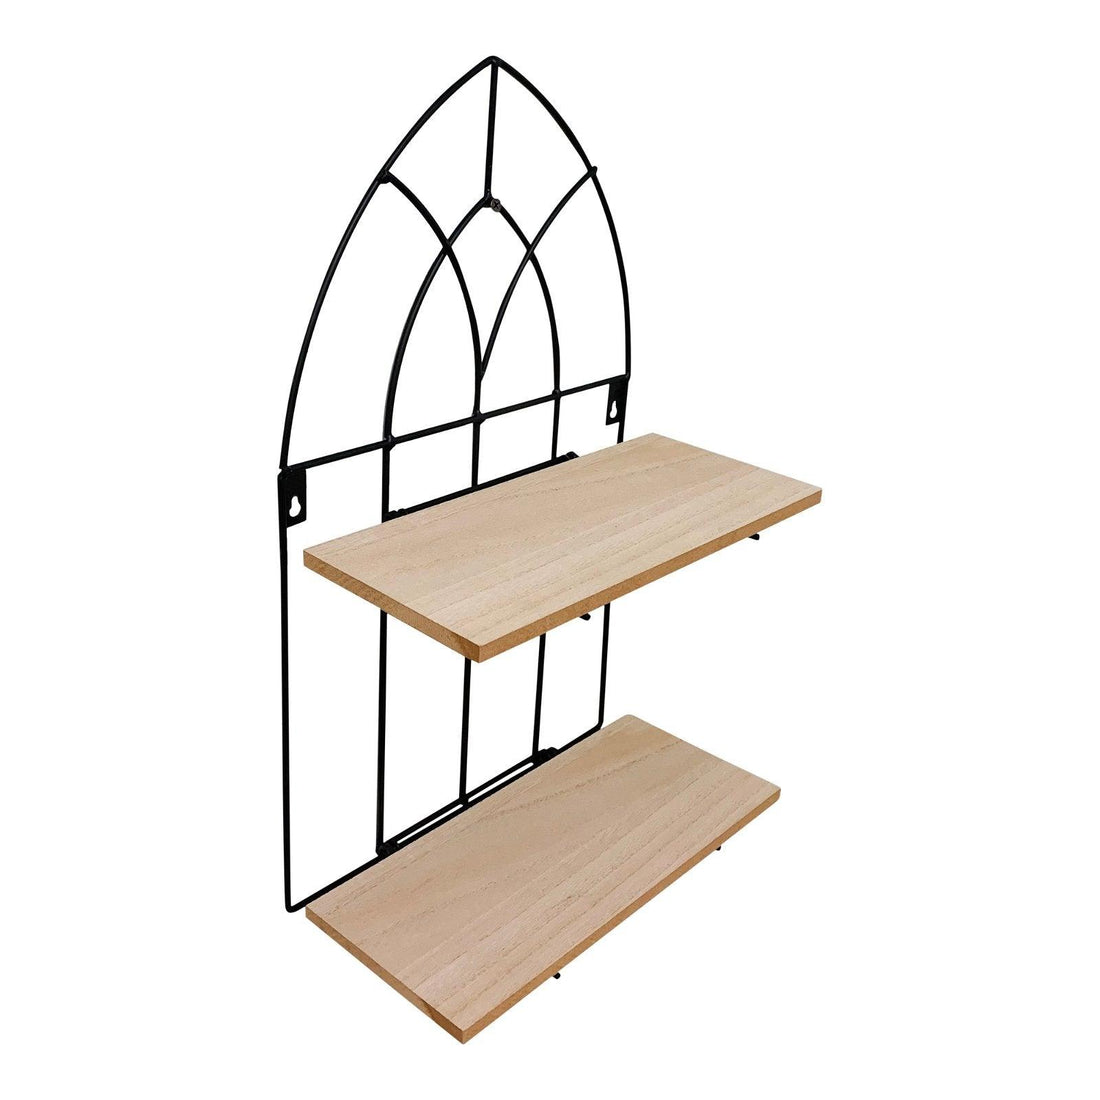 Black Metal Arch with 2 Wooden Shelves - £27.99 - Wall Hanging Shelving 